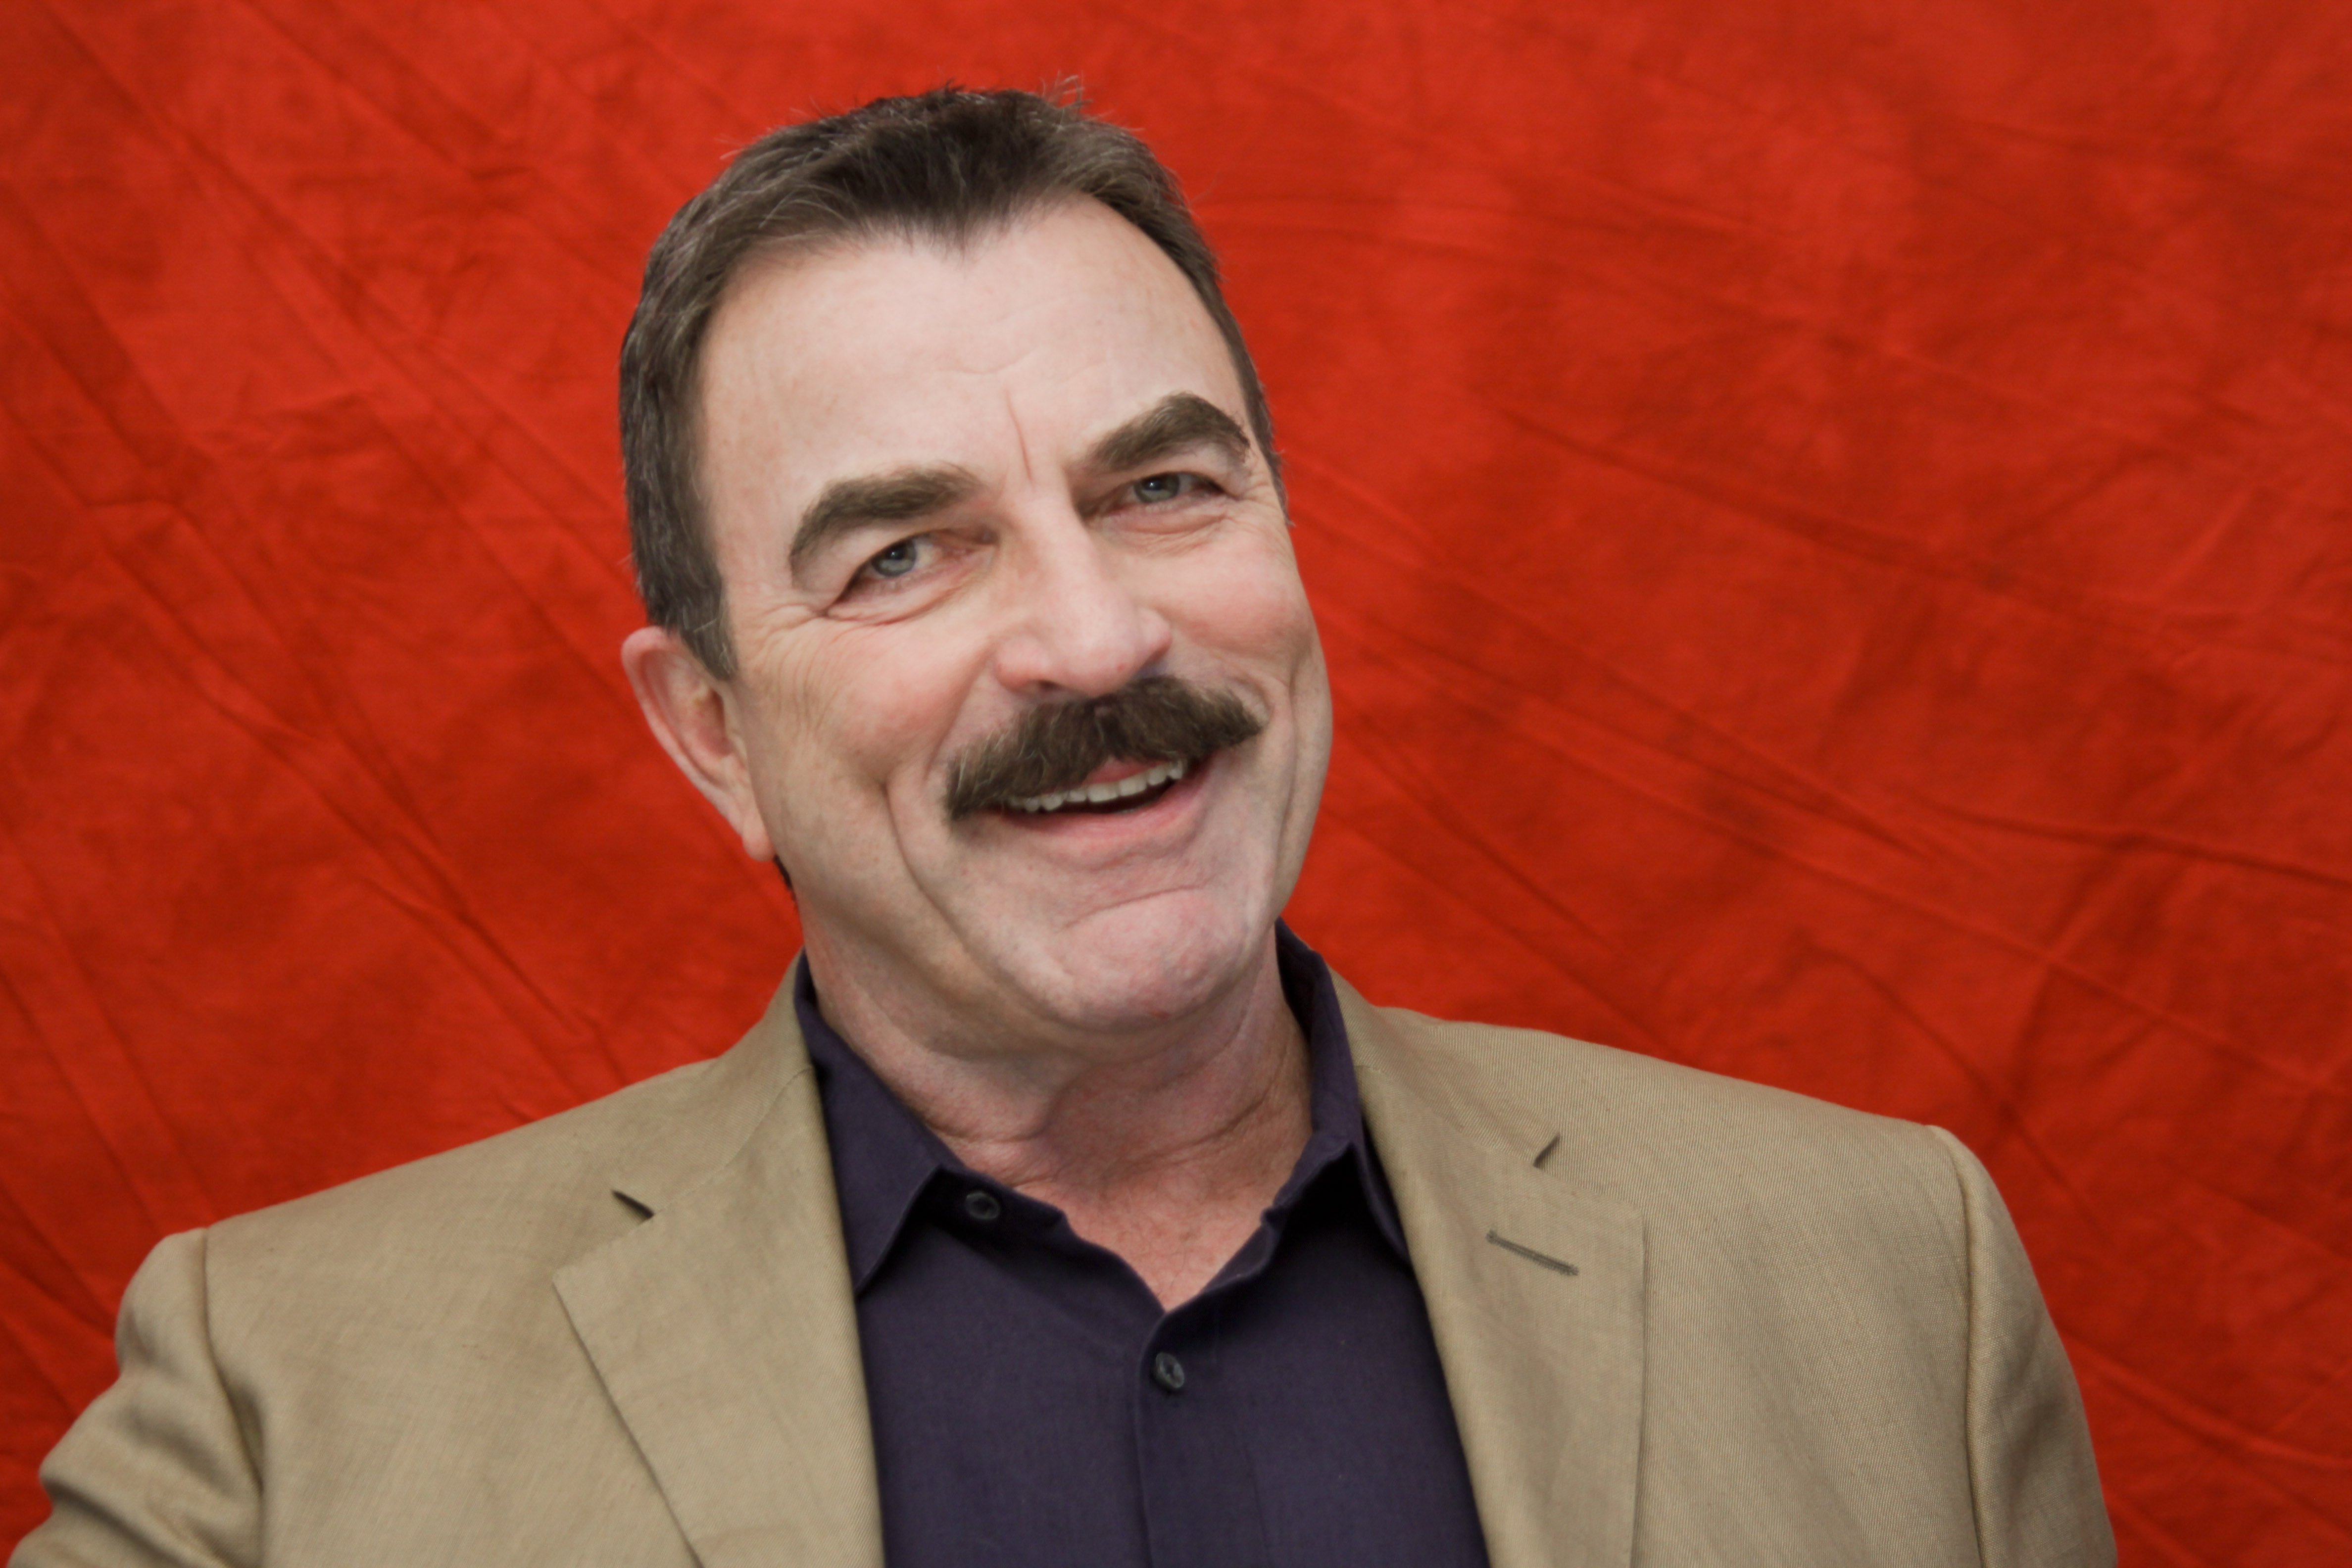 Tom Selleck poses for a photo during a portrait session in West Hollywood, California on August 16, 2010 | Photo: GettyImages